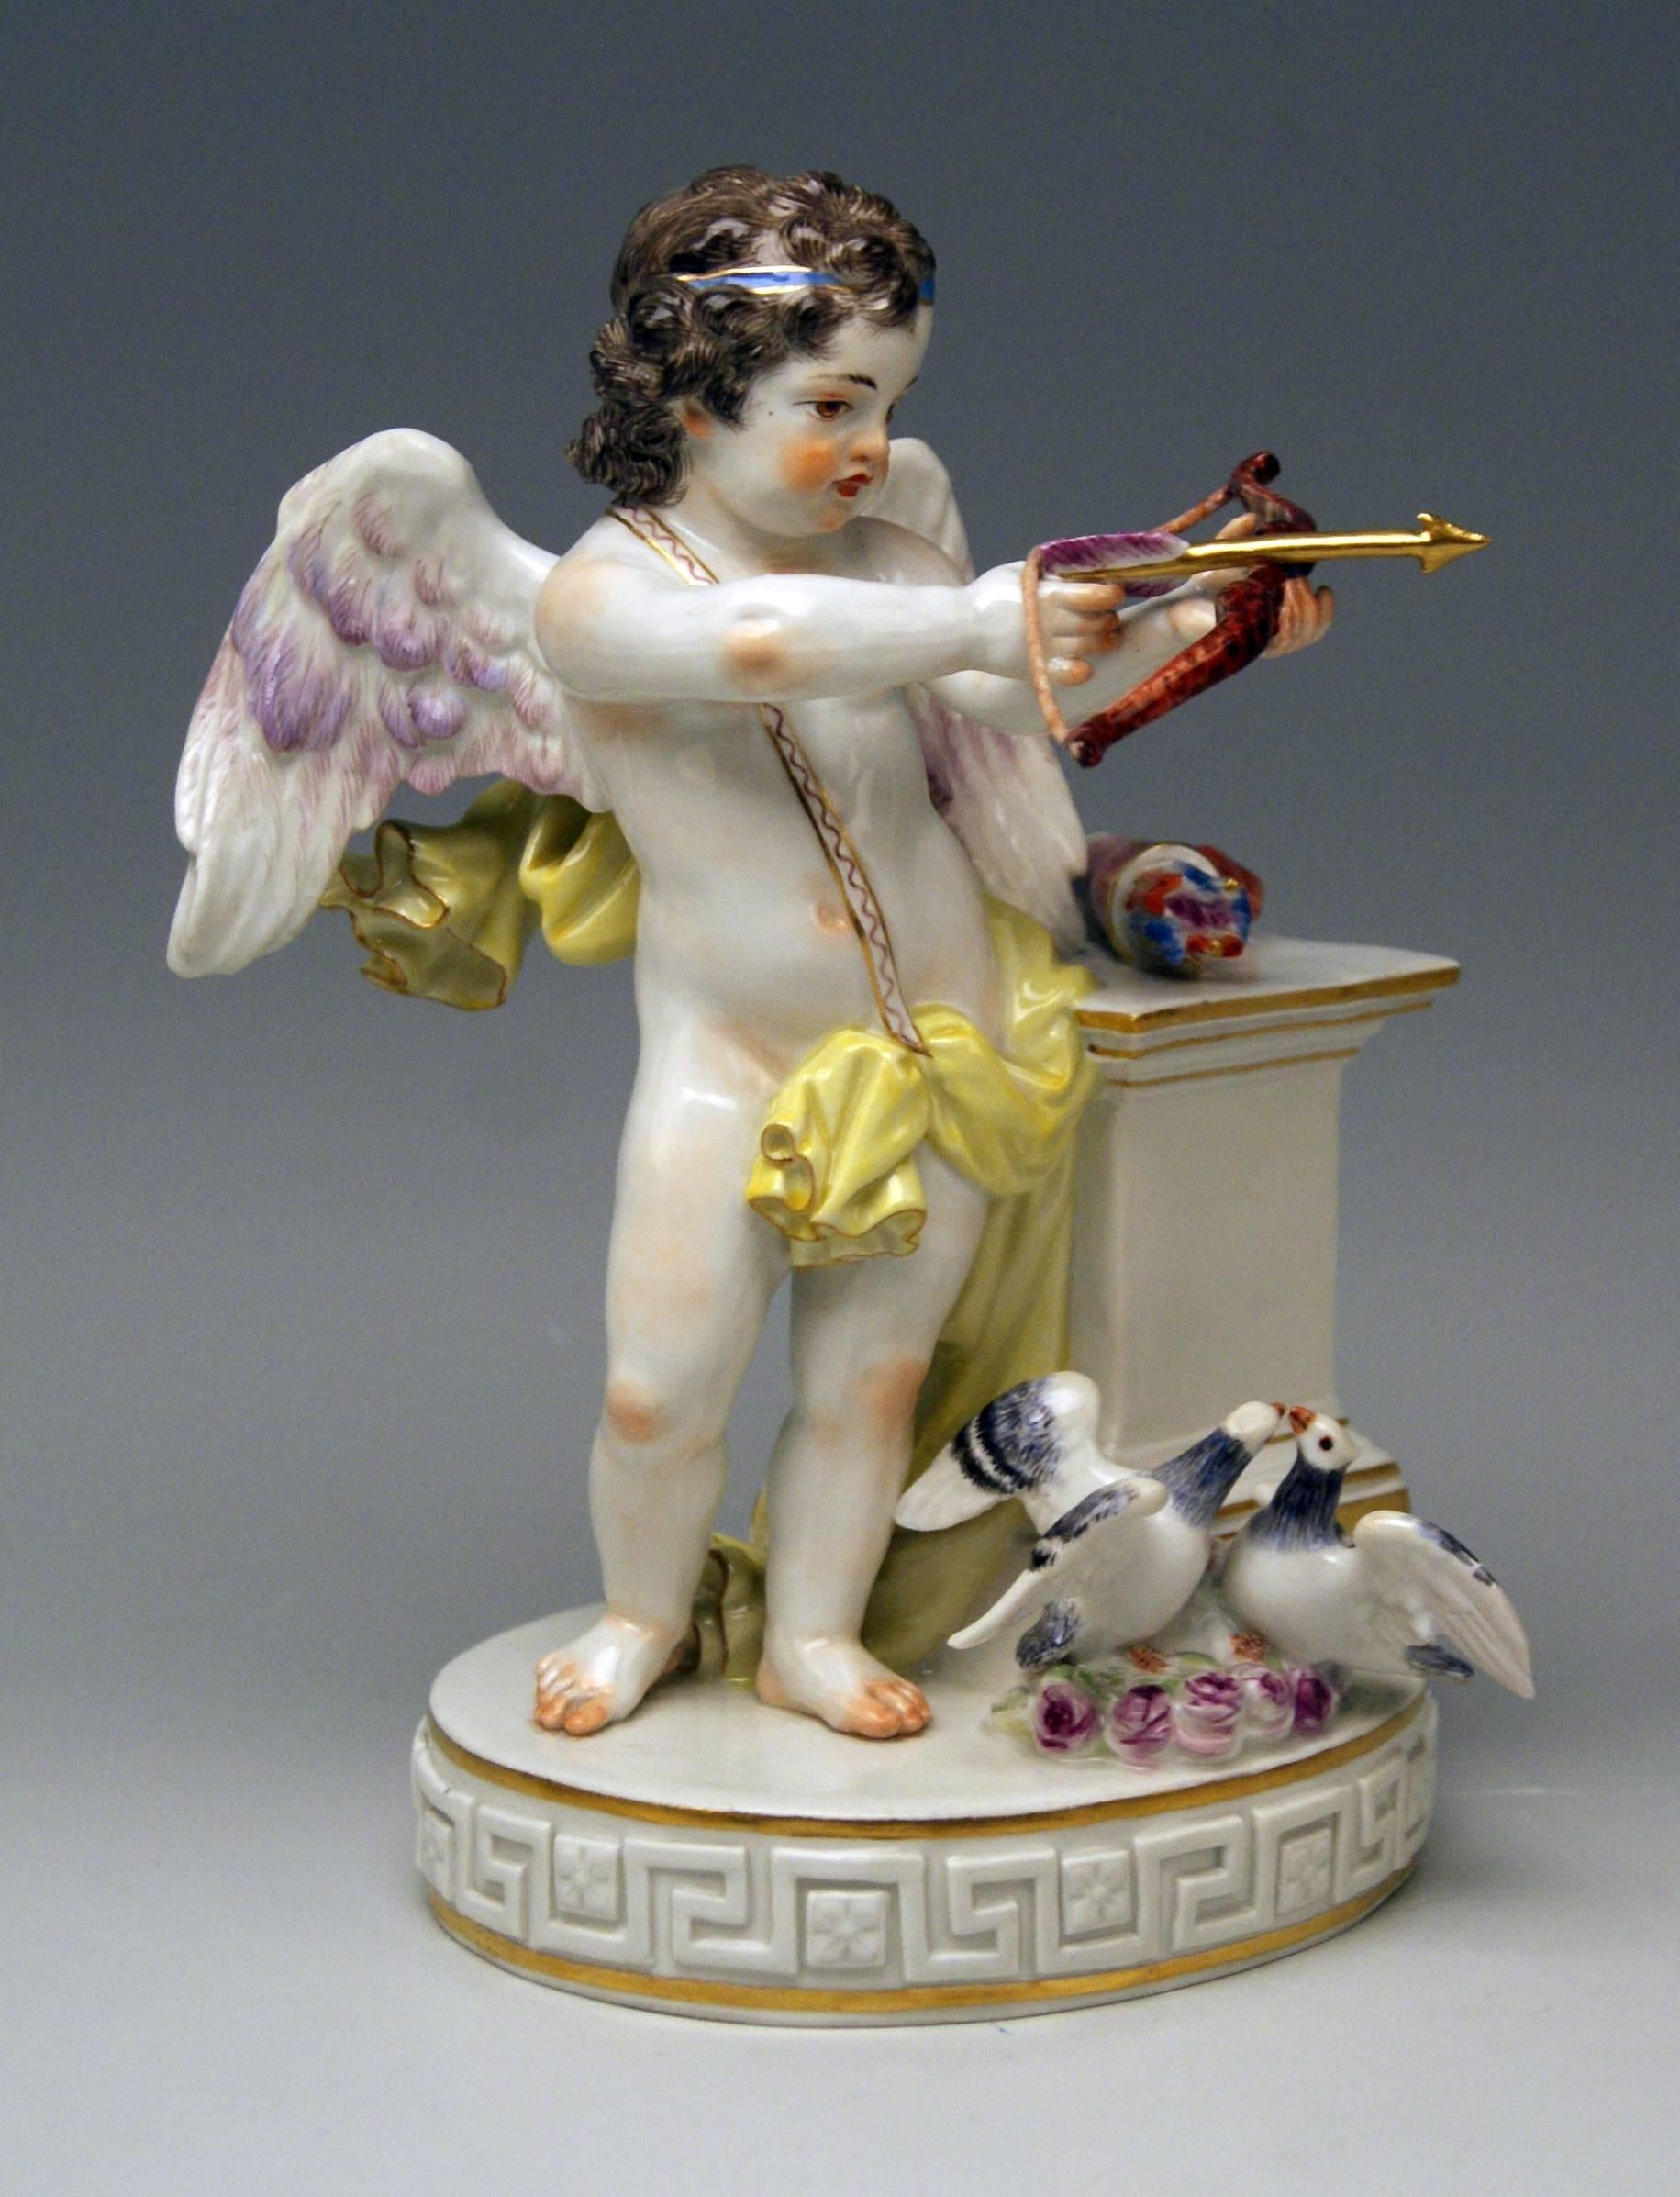 Meissen most lovely figurine: Cherub of Love 'je Les Enflamme'

Measures / dimensions:
height 7.87 inches / 20.0 cm 
width 5.31 inches / 13.5 cm 
depth 4.52 inches / 11.5 cm 

Manufactory: Meissen
Hallmarked: Blue Meissen Sword Mark (glazed